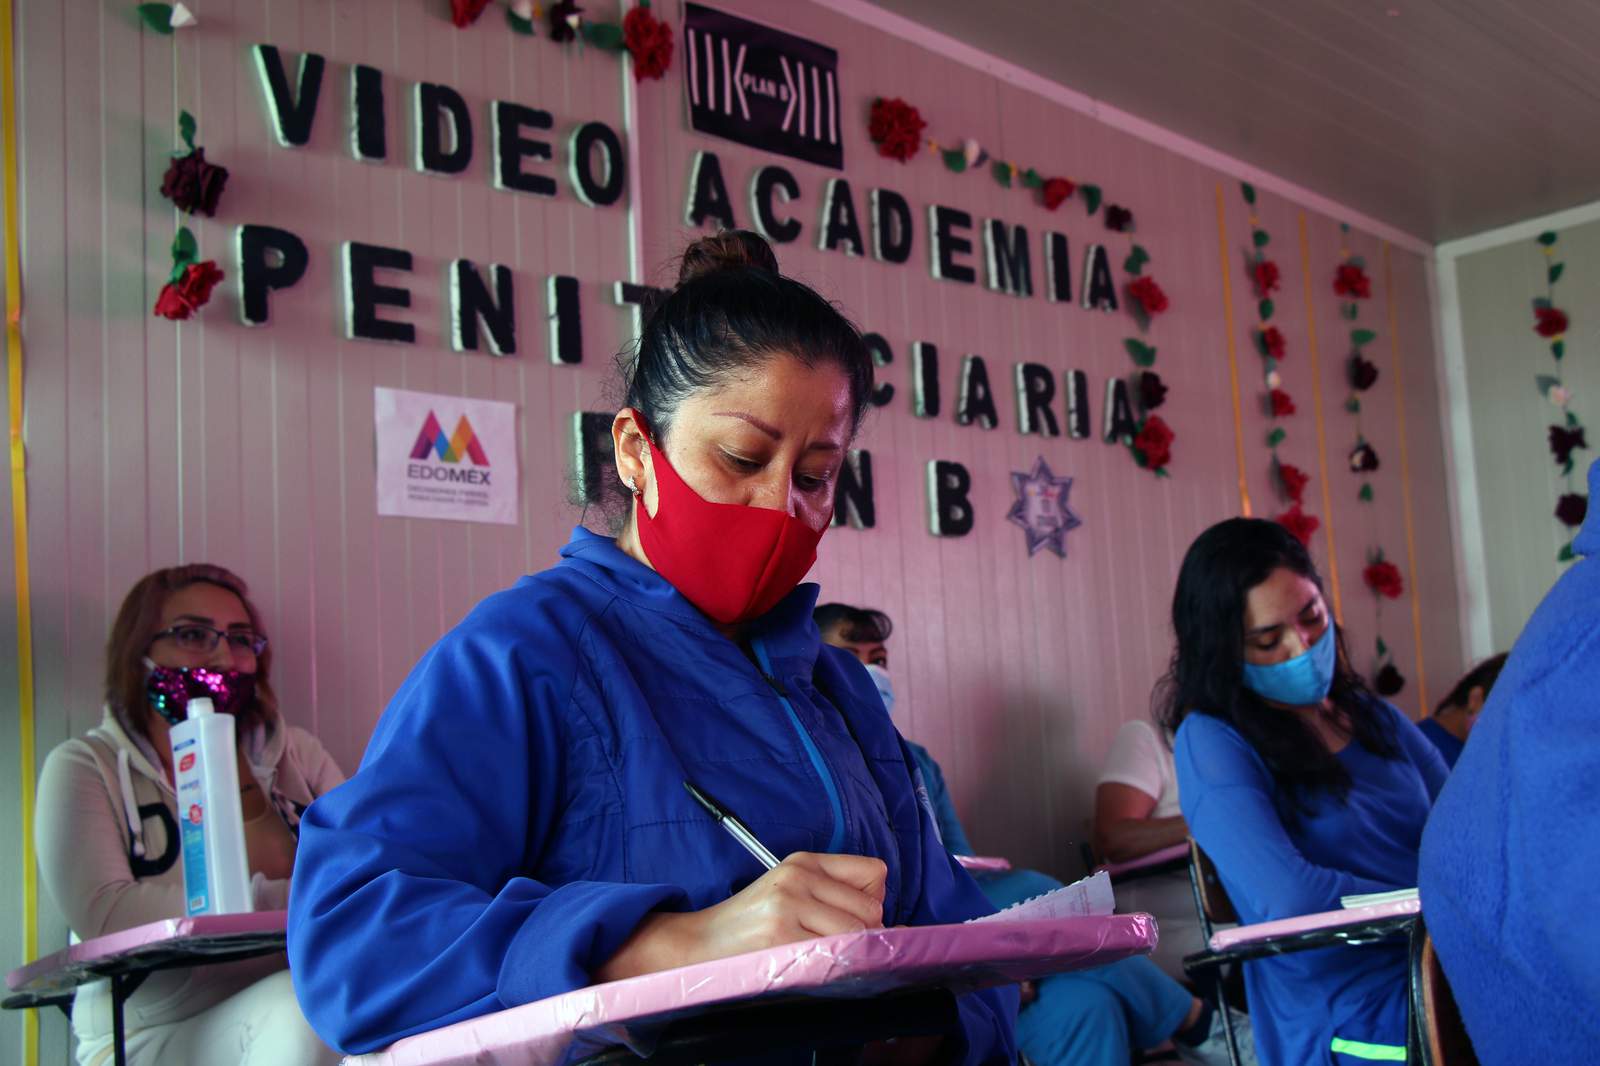 In Mexico women inmates find education chance amid pandemic